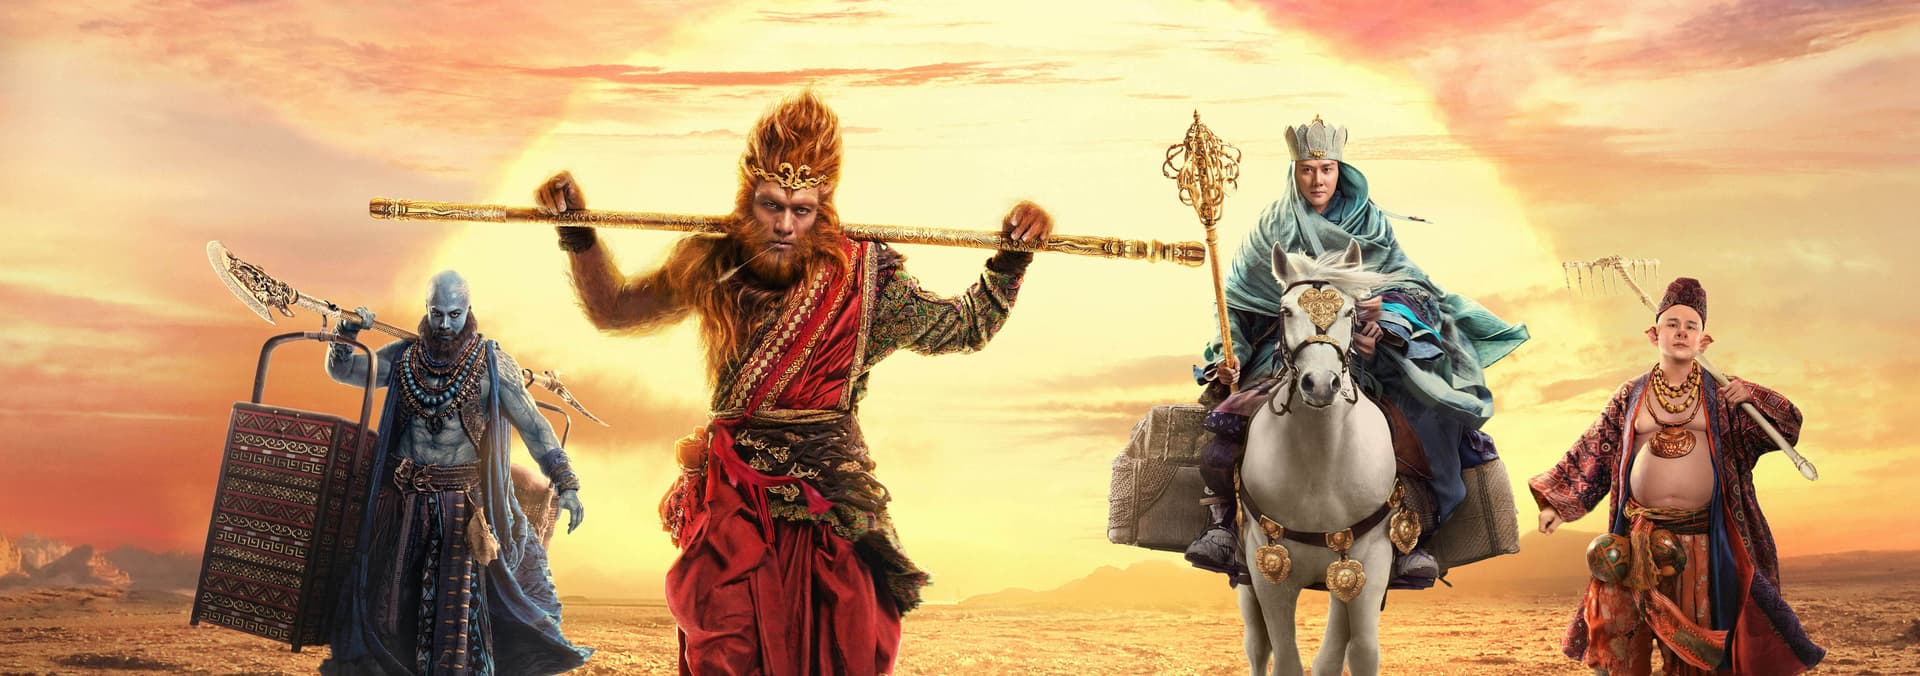 the monkey king 2 full movie in english